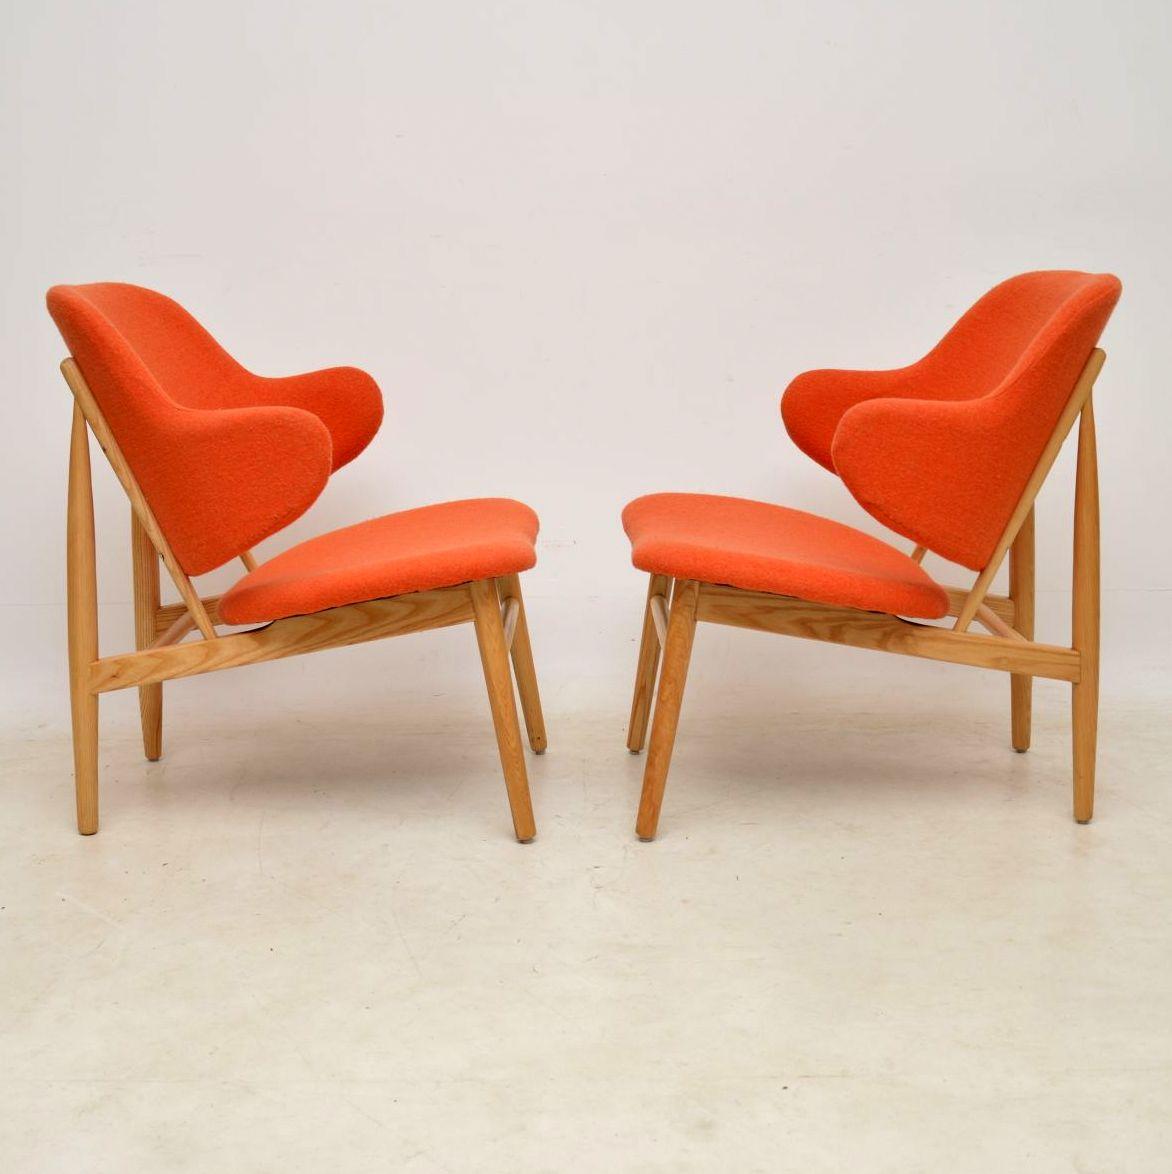 A stylish and extremely comfortable pair of armchairs, these are by the famous Danish designer IB Kofod Larsen. They are beautifully made from solid ash, and are covered in a lovely soft pale orange upholstery. The condition is excellent throughout,